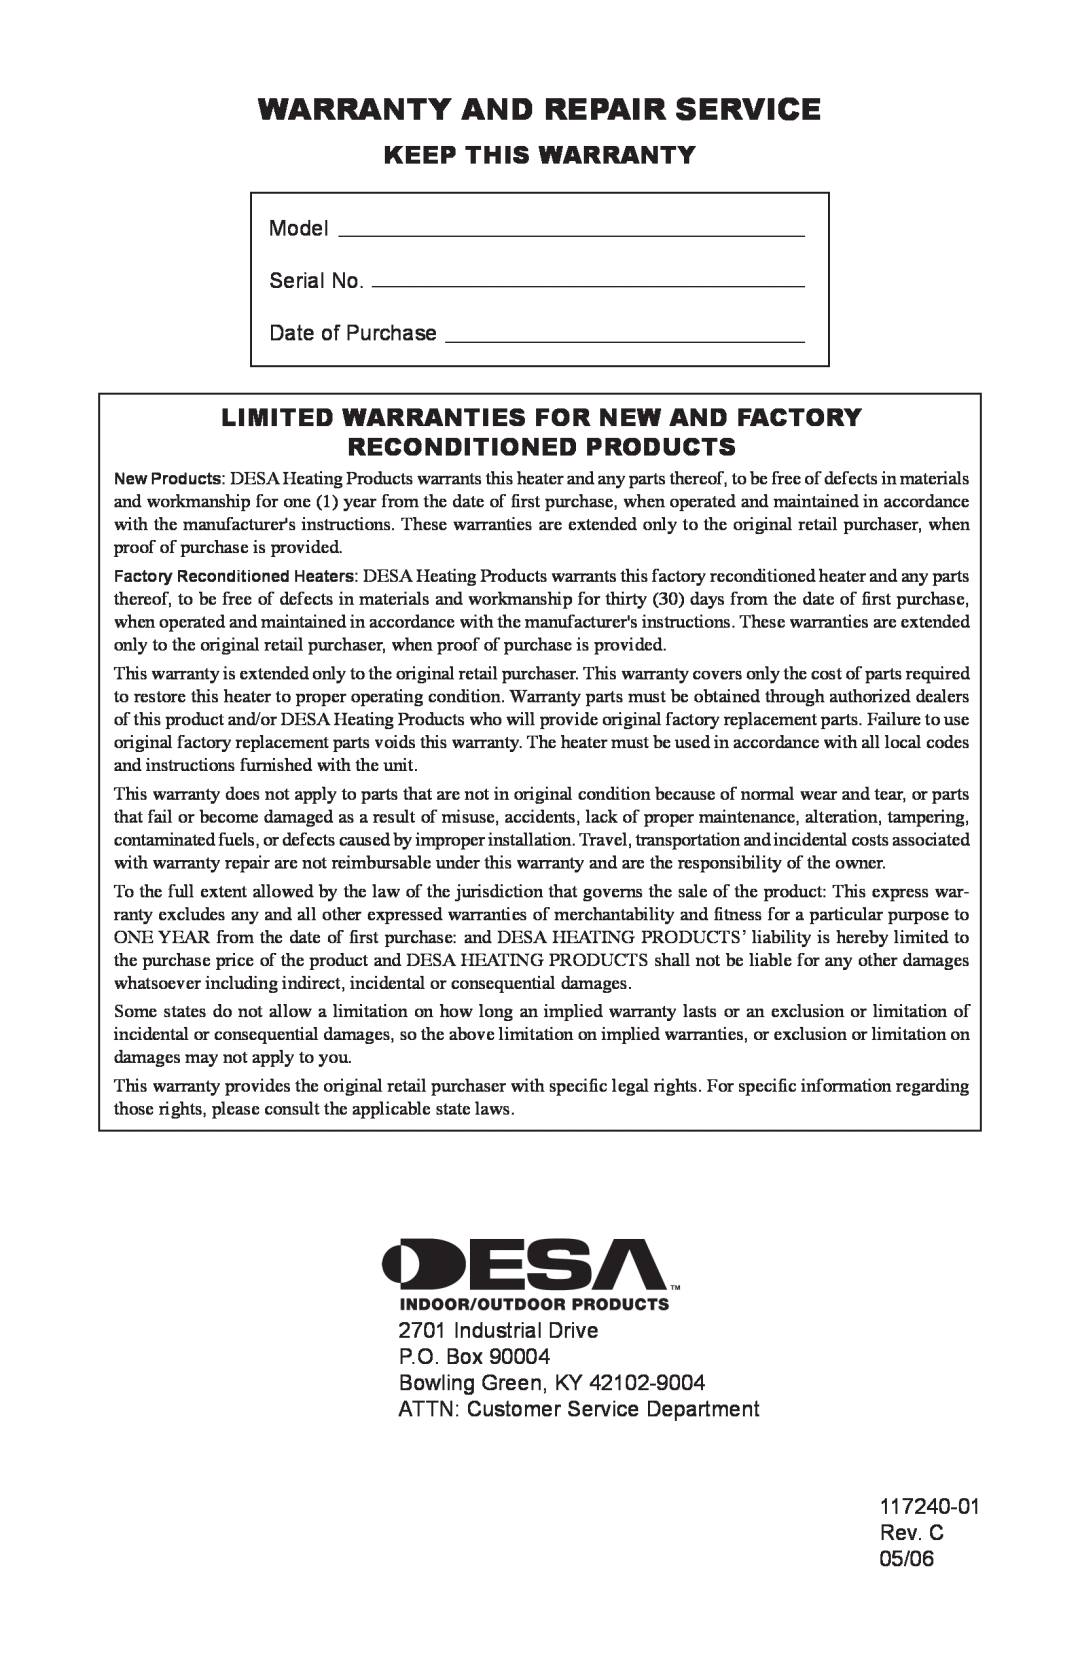 Desa 000 BTu, 10, 000-30 owner manual Warranty and Repair Service, Keep This Warranty, Limited Warranties For New And Factory 